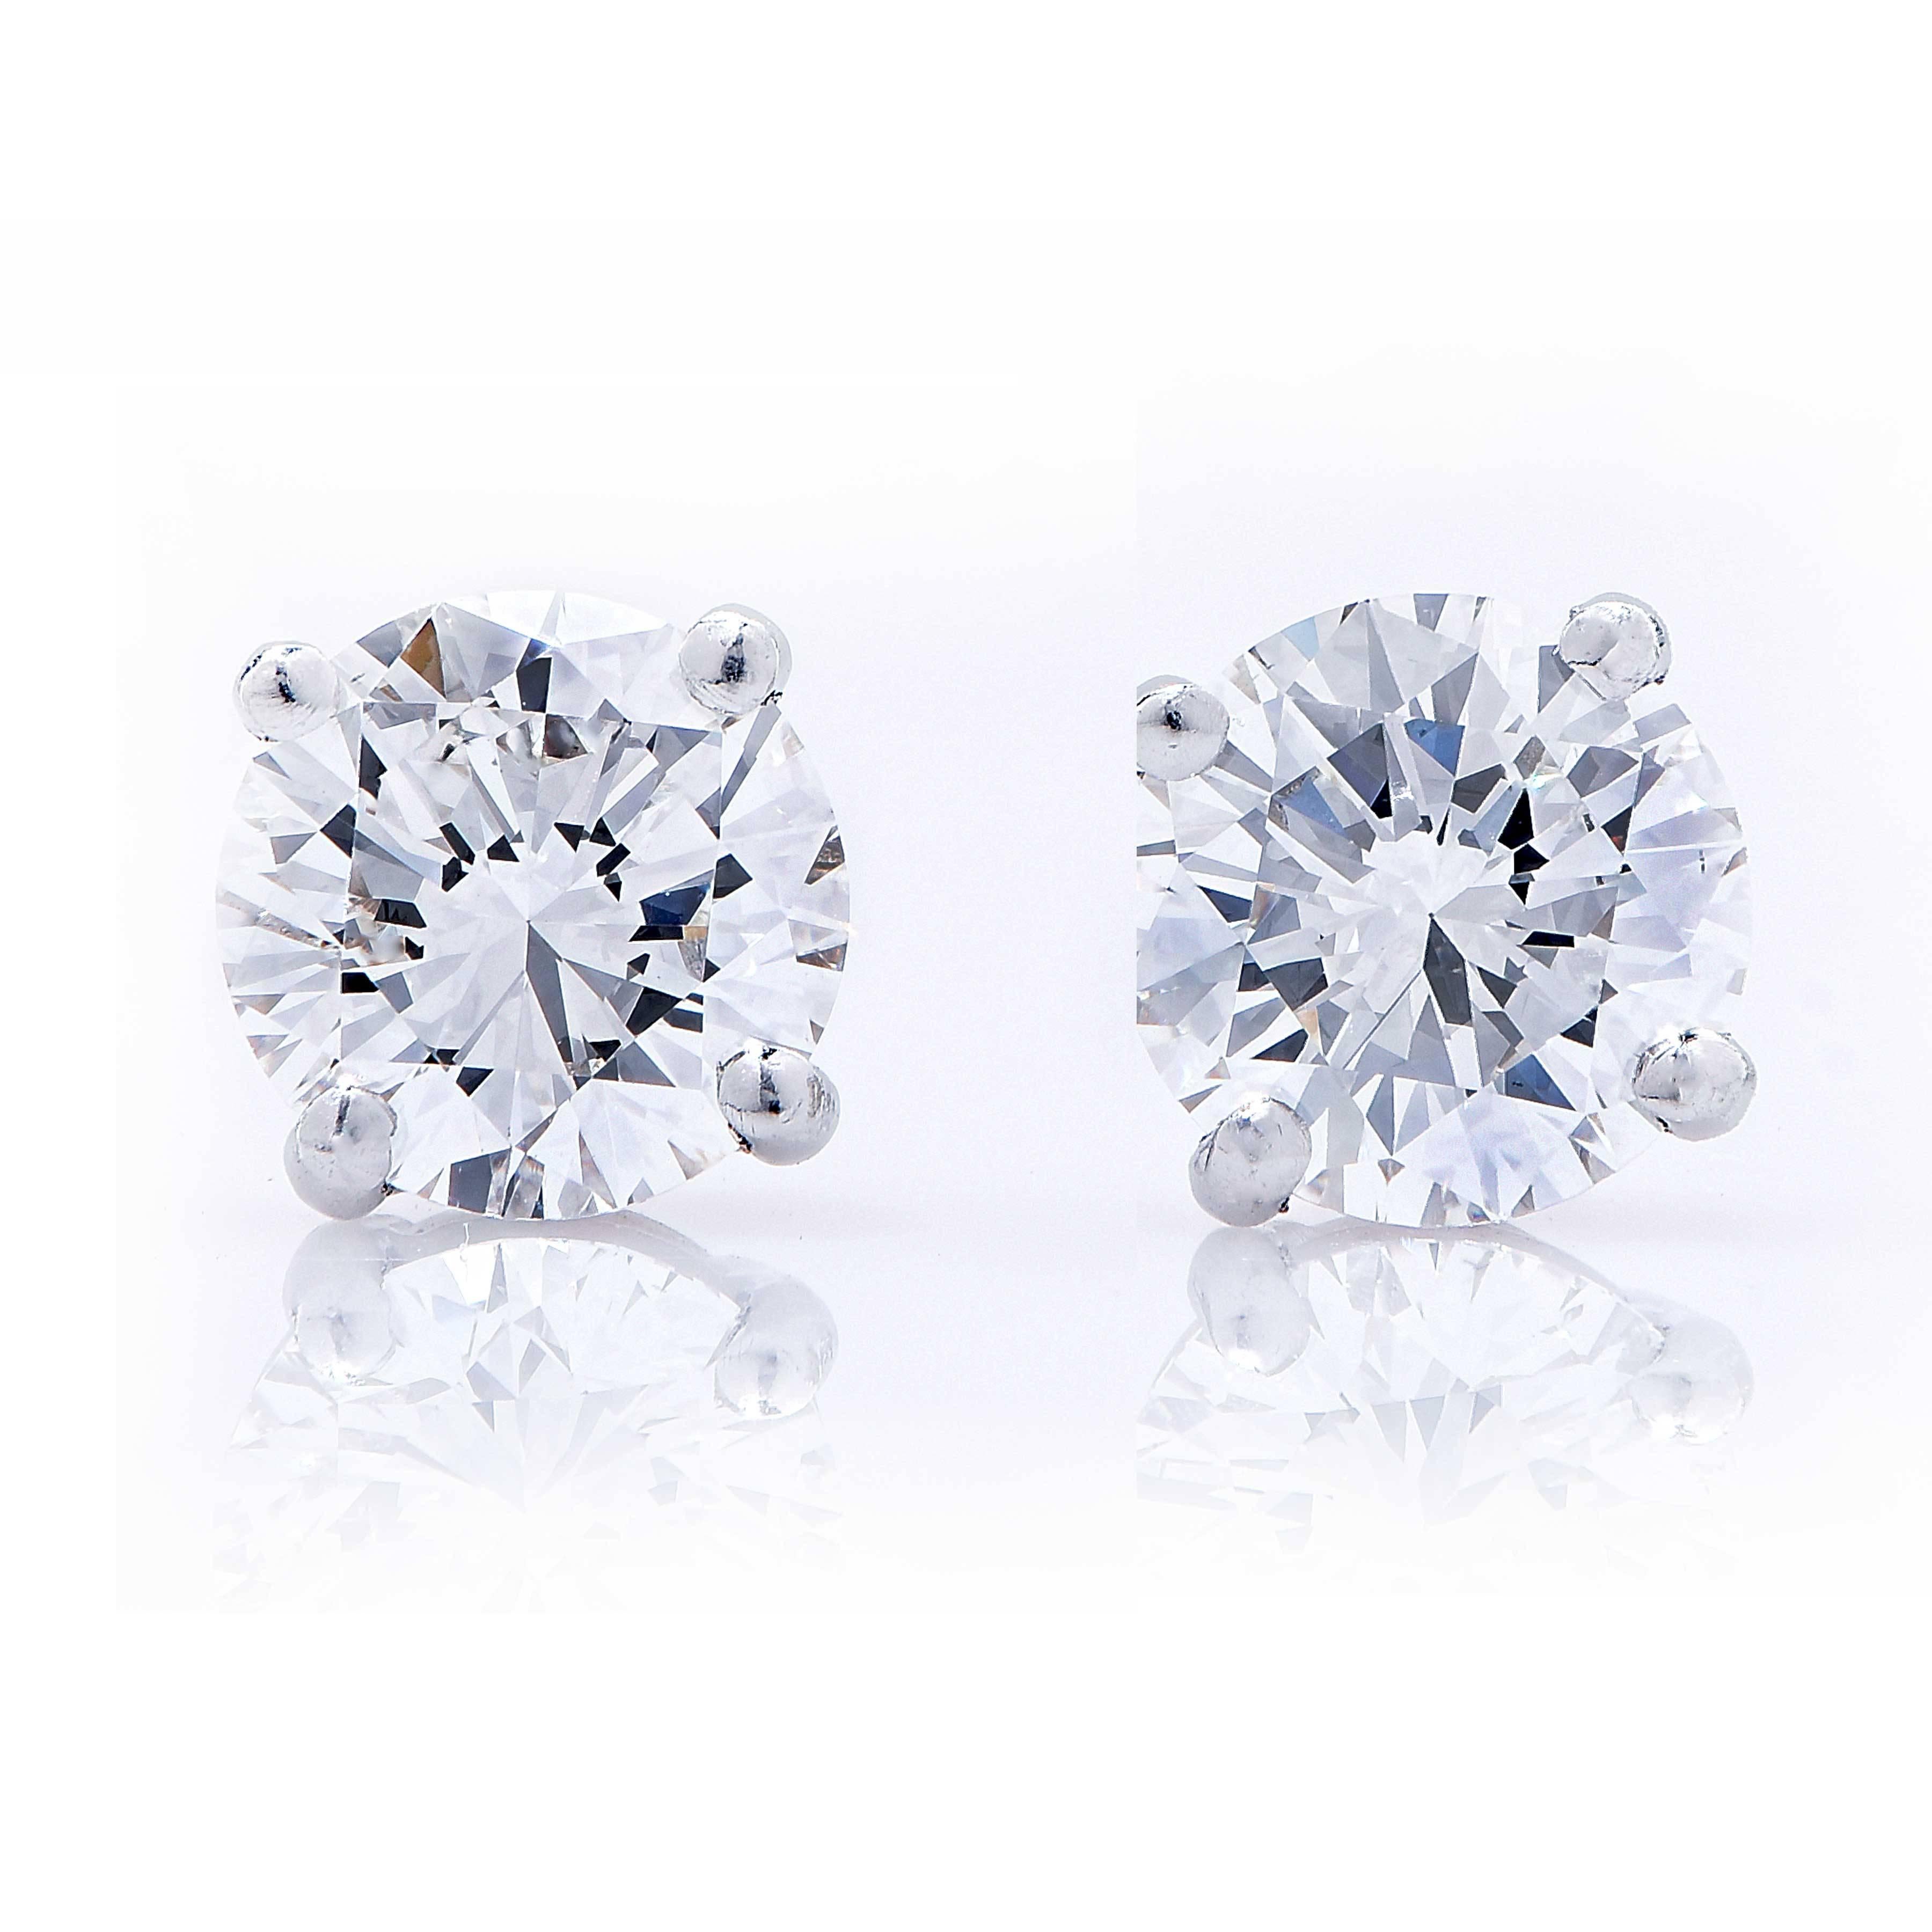 Diamond stud earrings set with 2 GIA certified G Color VS1 clarity round brilliant cut diamond weighing a total of 2.64 carats. They are set in platinum with locking backs to keep them securely on. 